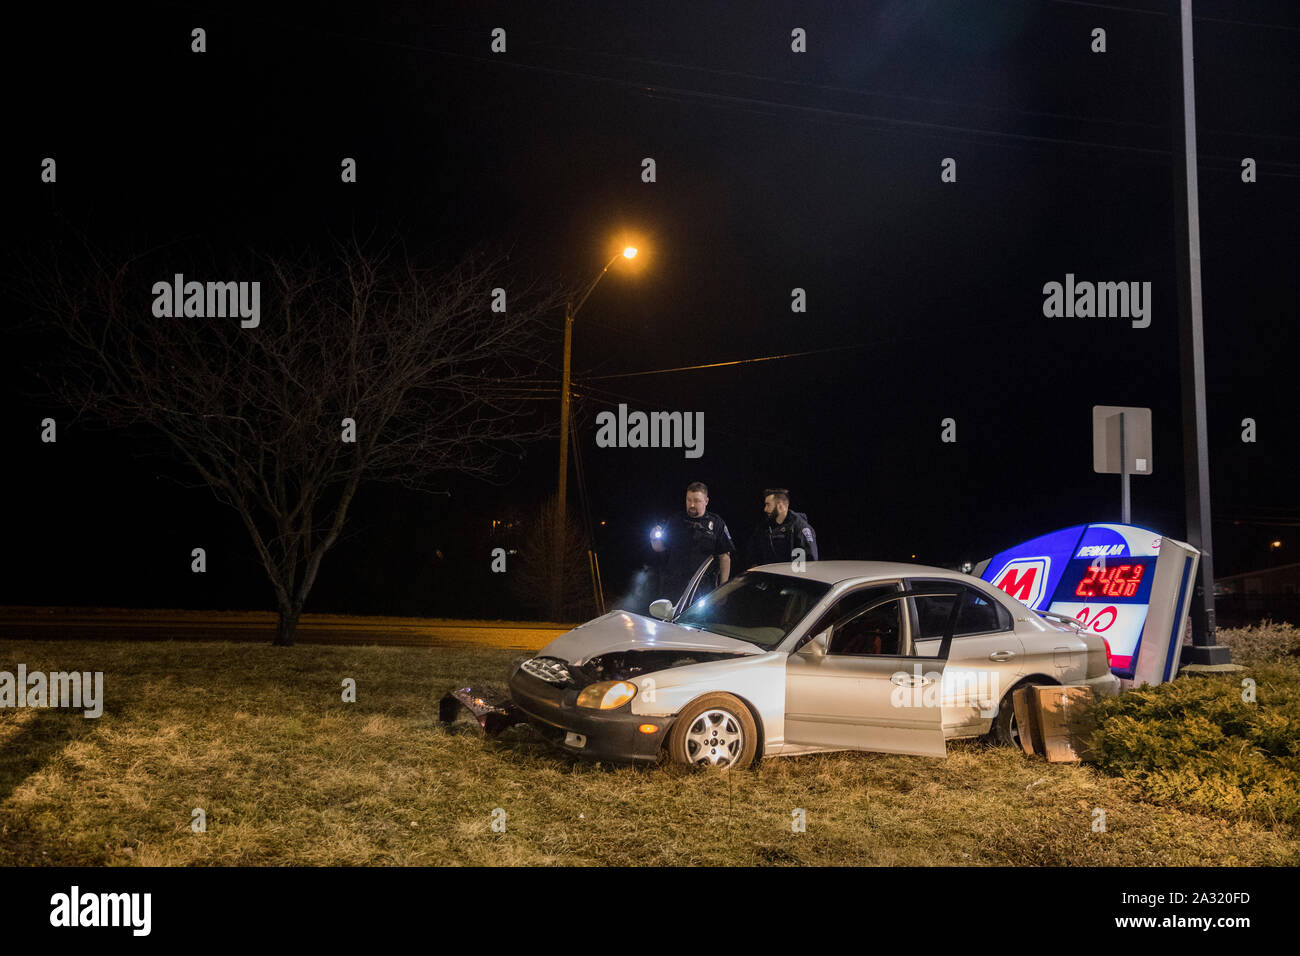 Police investigate at the scene of a car accident at the Marathon Gas station located at 1307 W 3rd St, before 2 a.m., Sunday, February 24, 2019 in Bloomington, Ind. The driver of the car fled the scene after hitting the sign, and police were looking for them in the area of Patterson. (Photo by Jeremy Hogan) Stock Photo